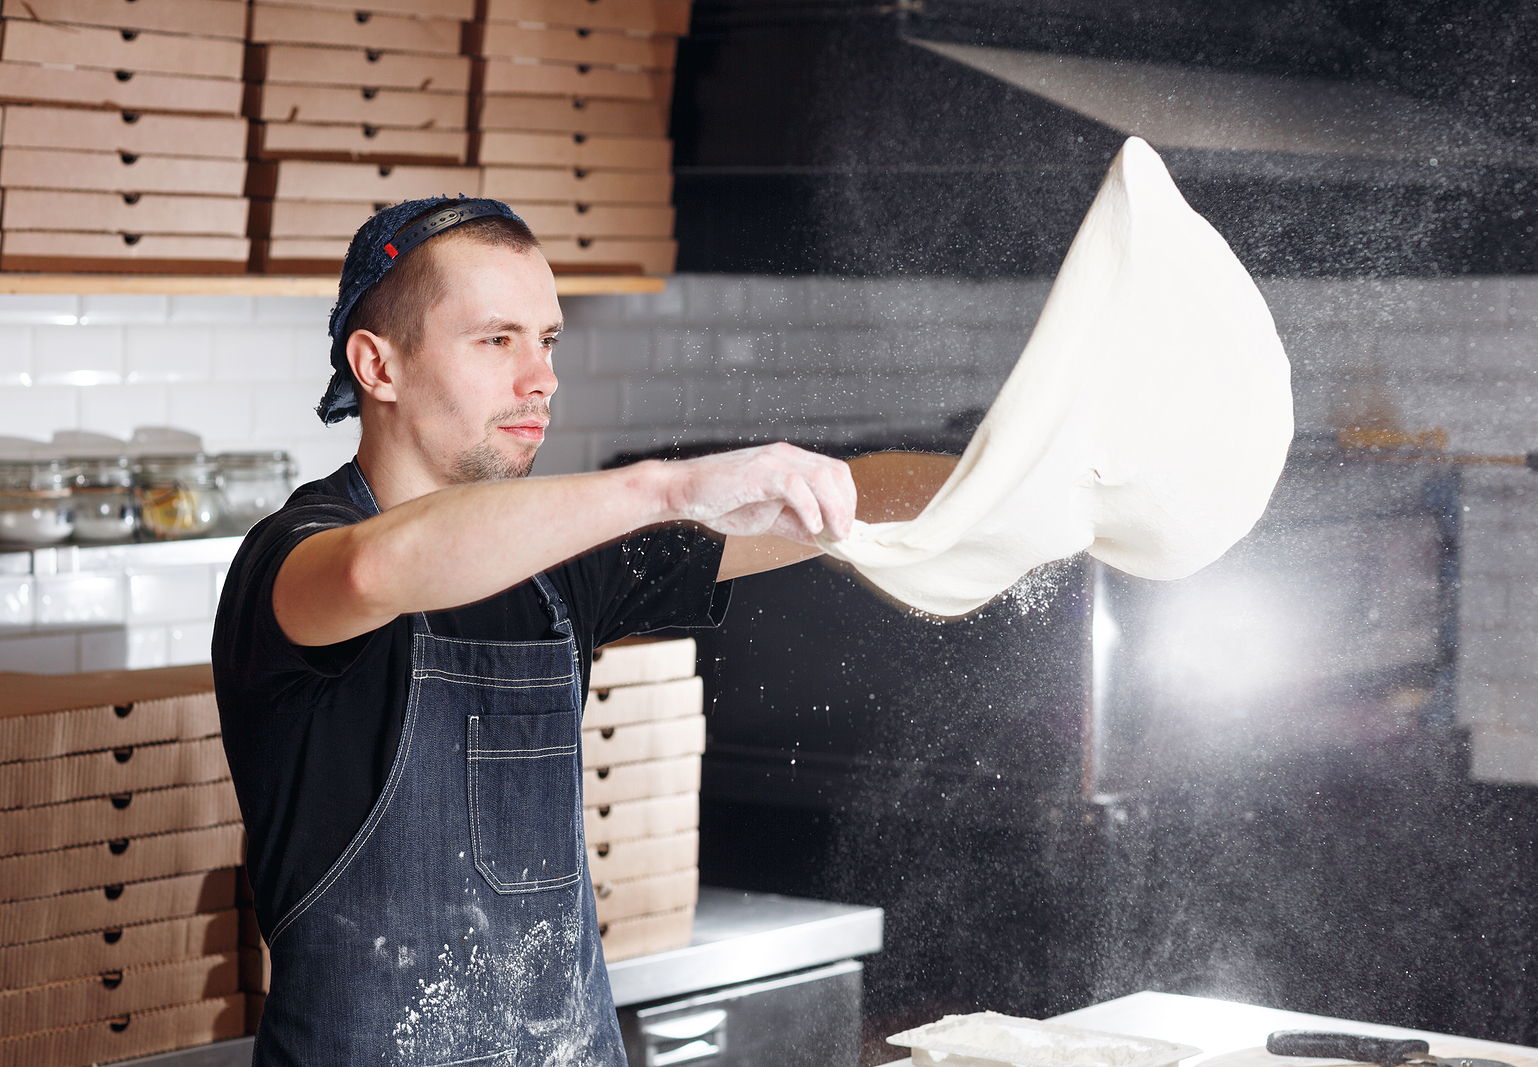 A man with a backward baseball cap working at a pizzeria tossing dough in the air.